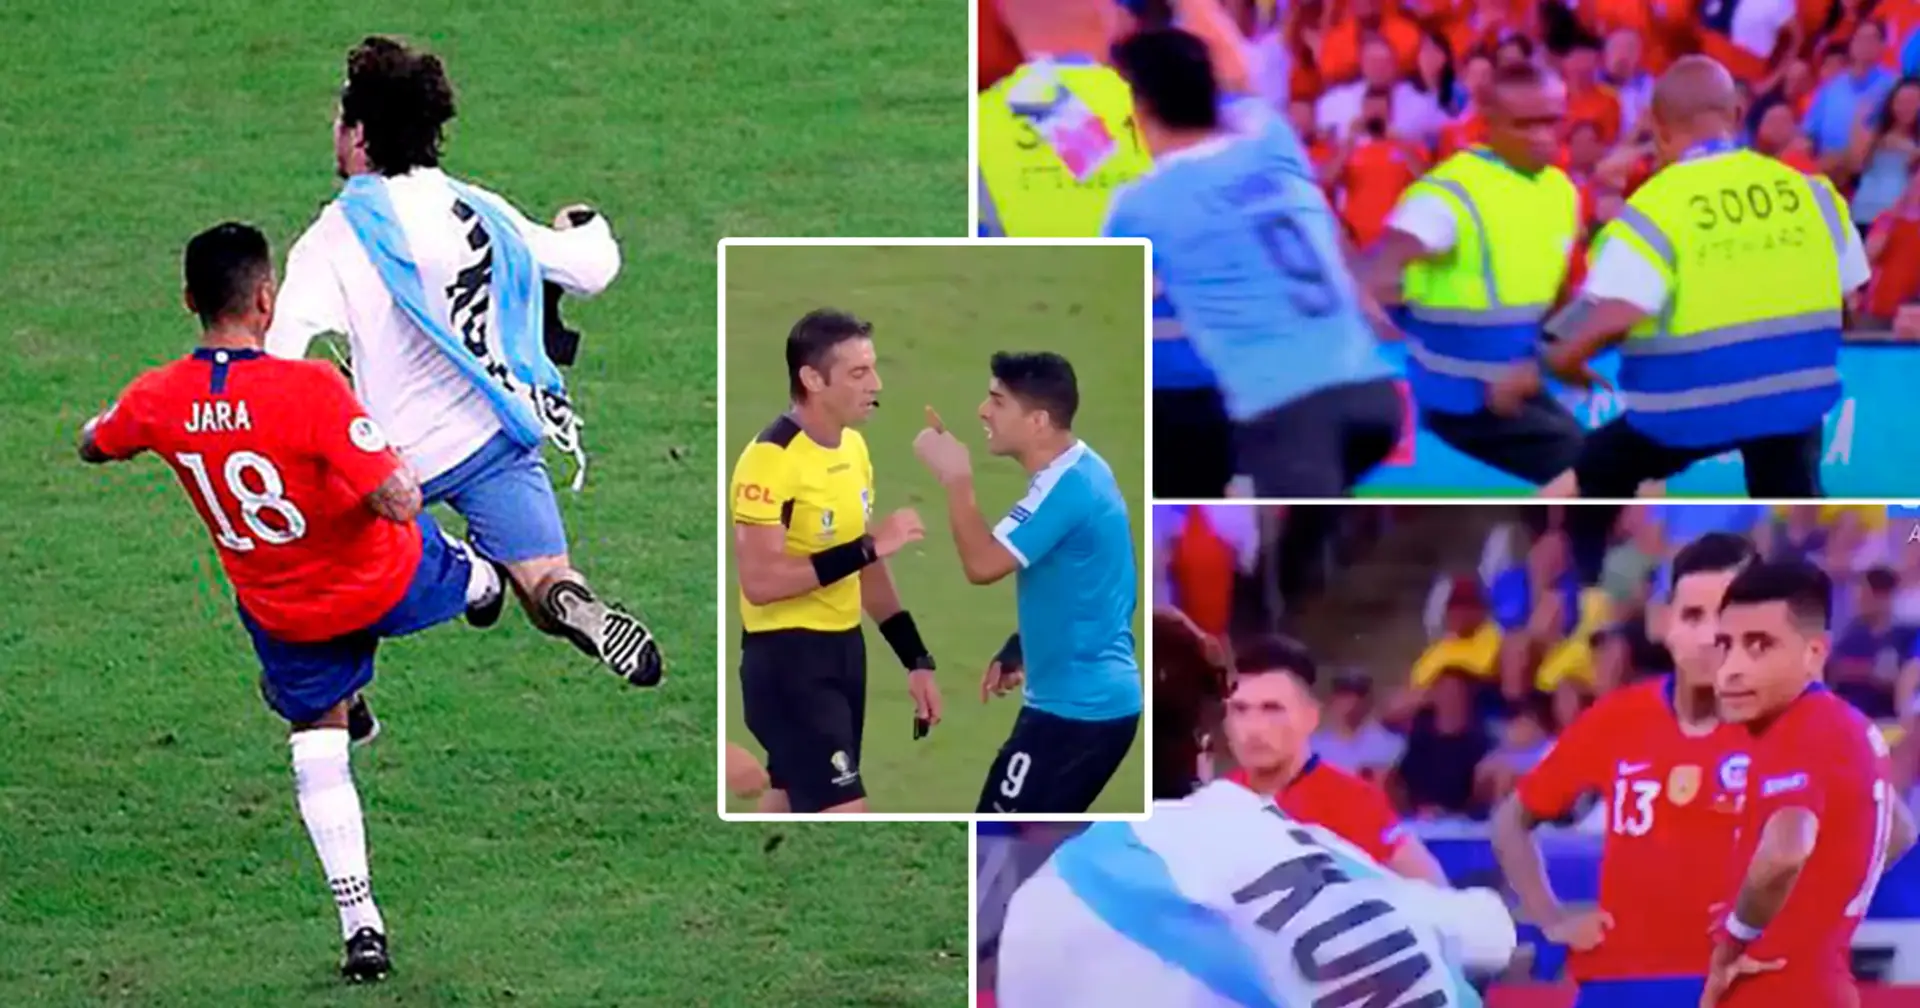 Luis Suarez once tried to get Chile player sent off after he tackled pitch invader 